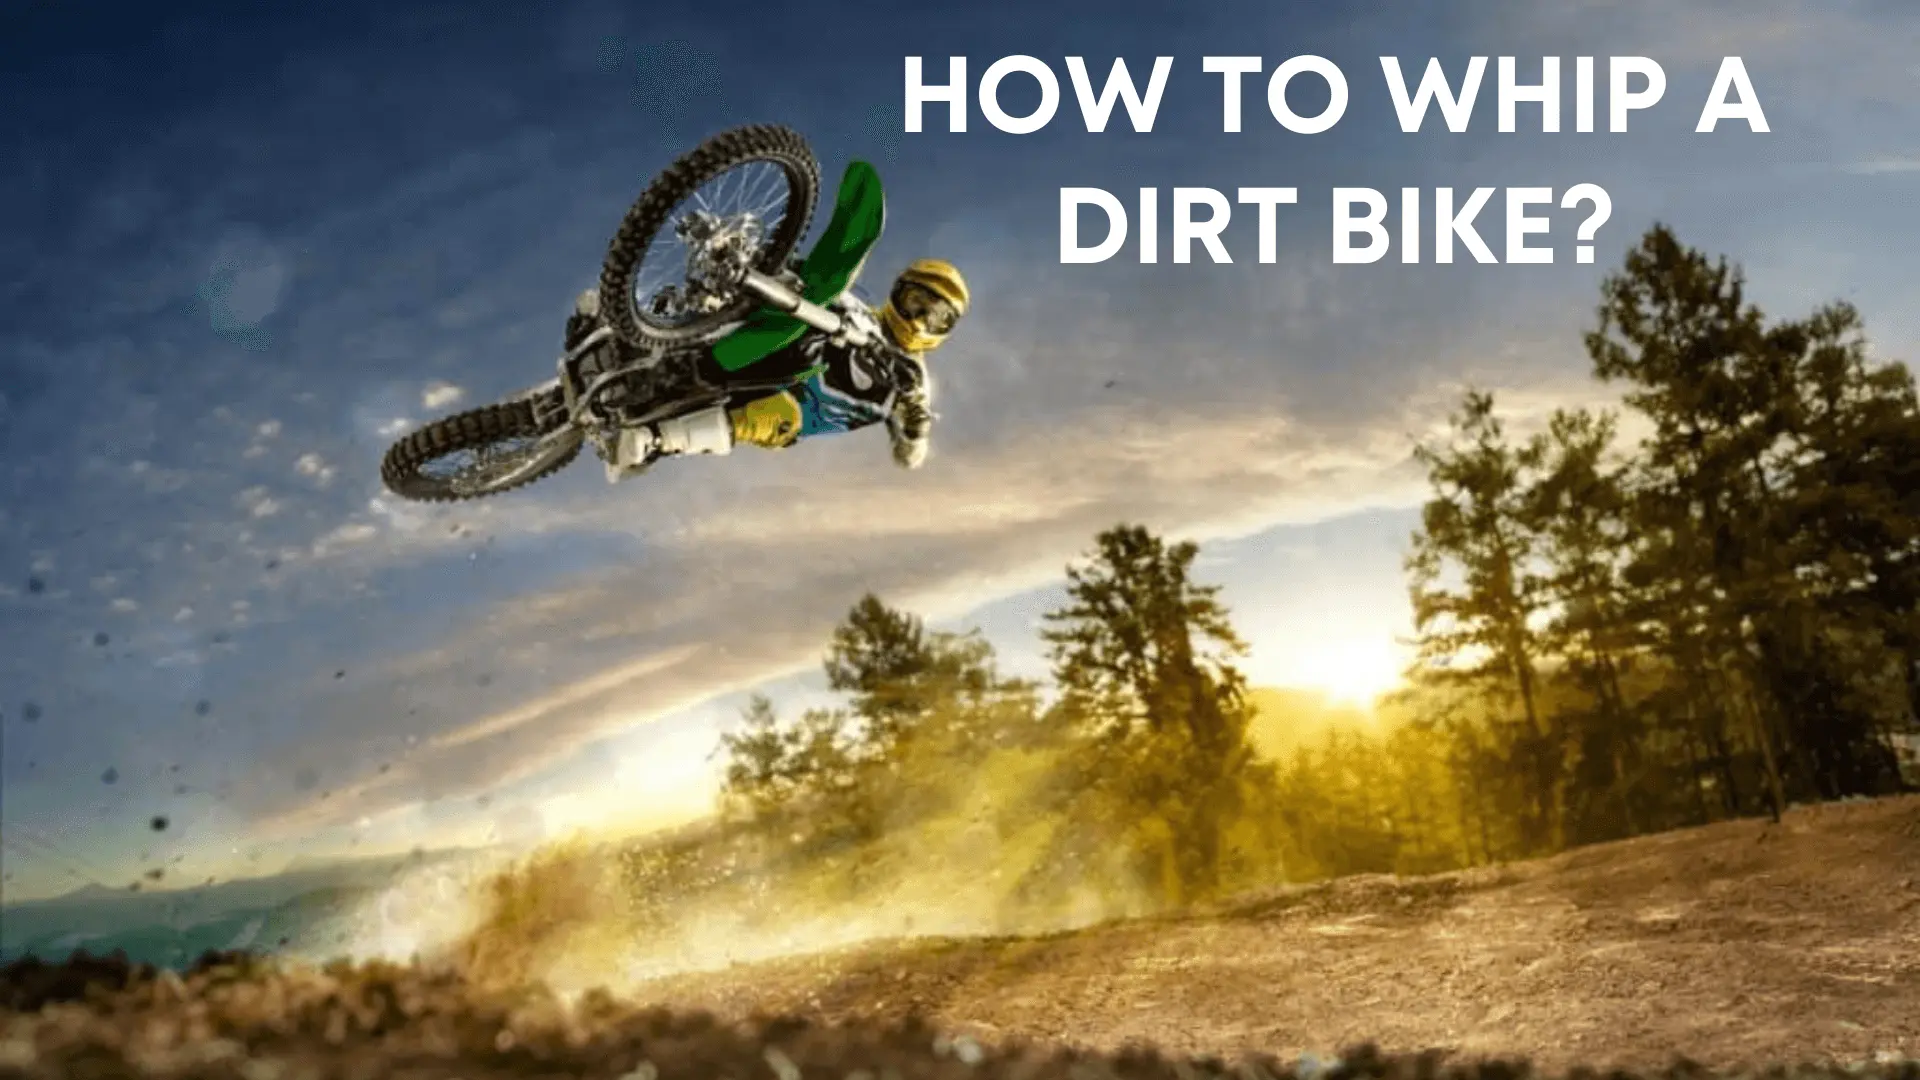 How to Whip a Dirt Bike?